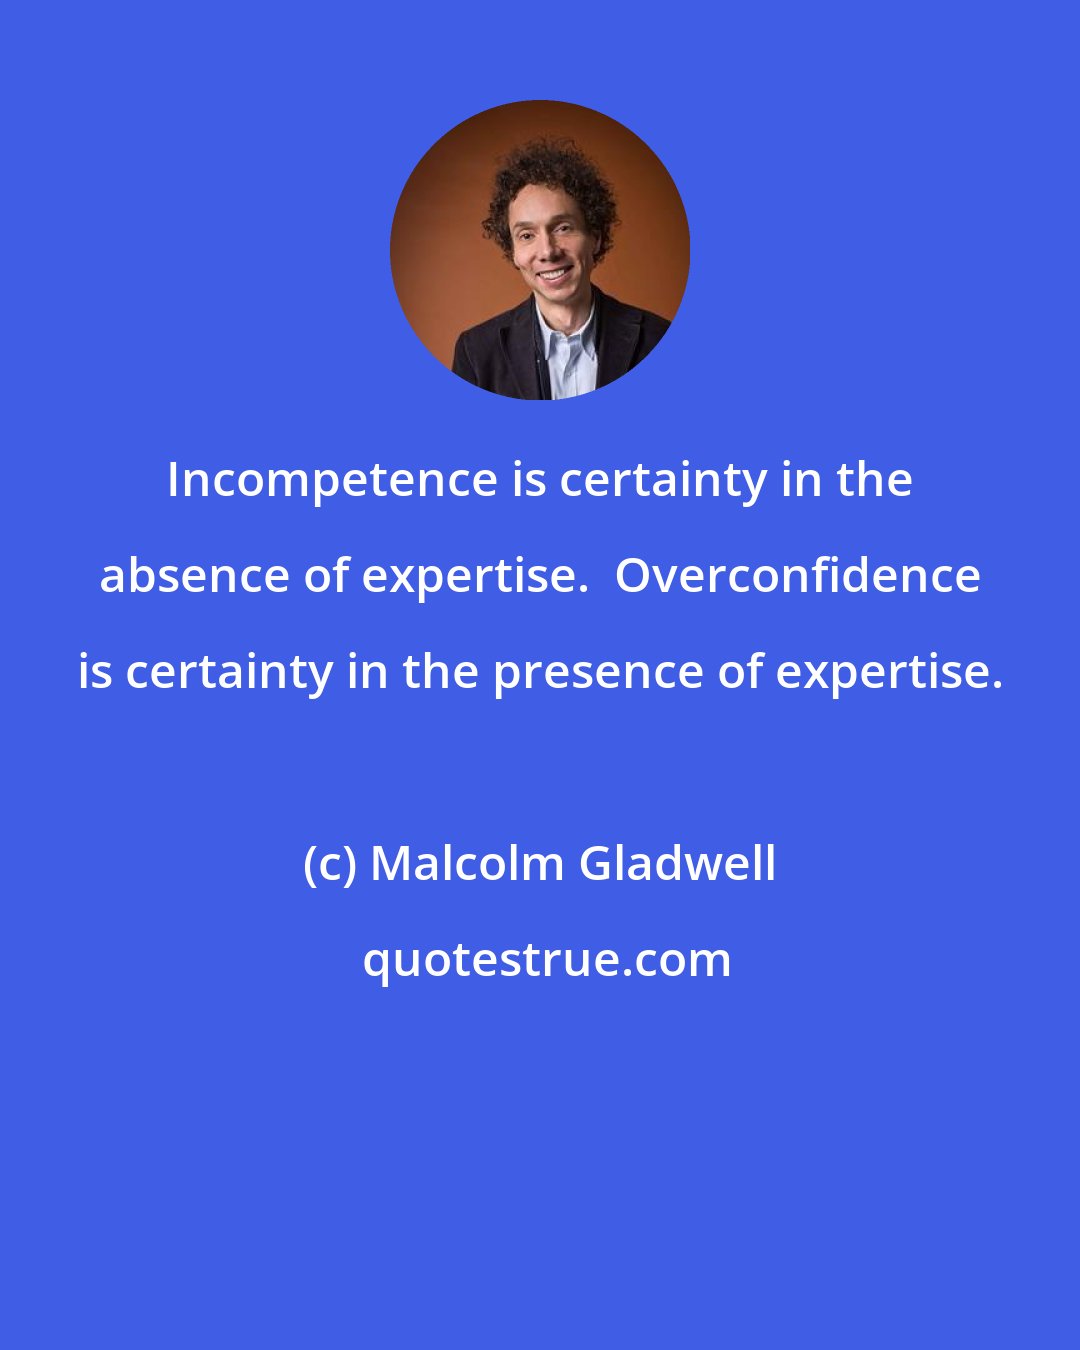 Malcolm Gladwell: Incompetence is certainty in the absence of expertise.  Overconfidence is certainty in the presence of expertise.